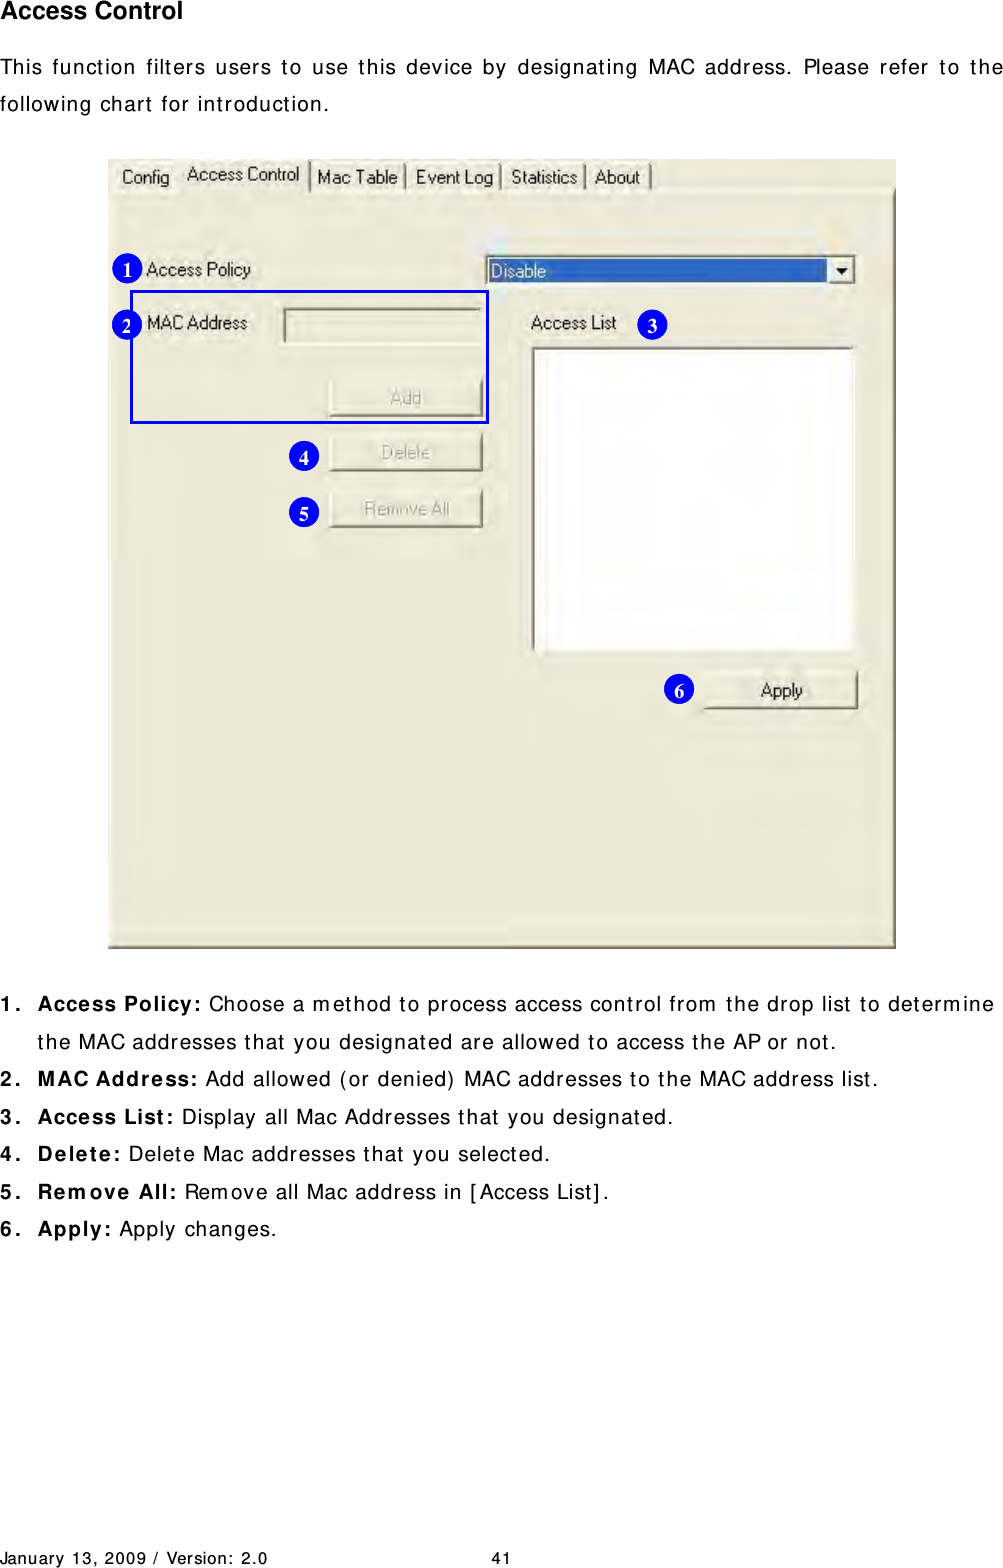 January 13, 2009 /  Ver sion:  2.0 41 Access Control This function filters users t o use this device by designat ing MAC address. Please refer t o the following chart  for int roduct ion.  1 . Access Policy: Choose a m et hod to process access cont rol from  t he drop list  to det erm ine the MAC addresses that  you designat ed are allowed to access t he AP or not . 2 . M AC Addr ess: Add allowed ( or denied)  MAC addresses t o the MAC address list. 3 . Access List : Display all Mac Addresses t hat  you designated. 4 . De le t e: Delet e Mac addresses t hat  you selected. 5 . Rem ove  All: Rem ove all Mac address in [ Access List] . 6 . Apply: Apply changes.        1 2  34 5 6